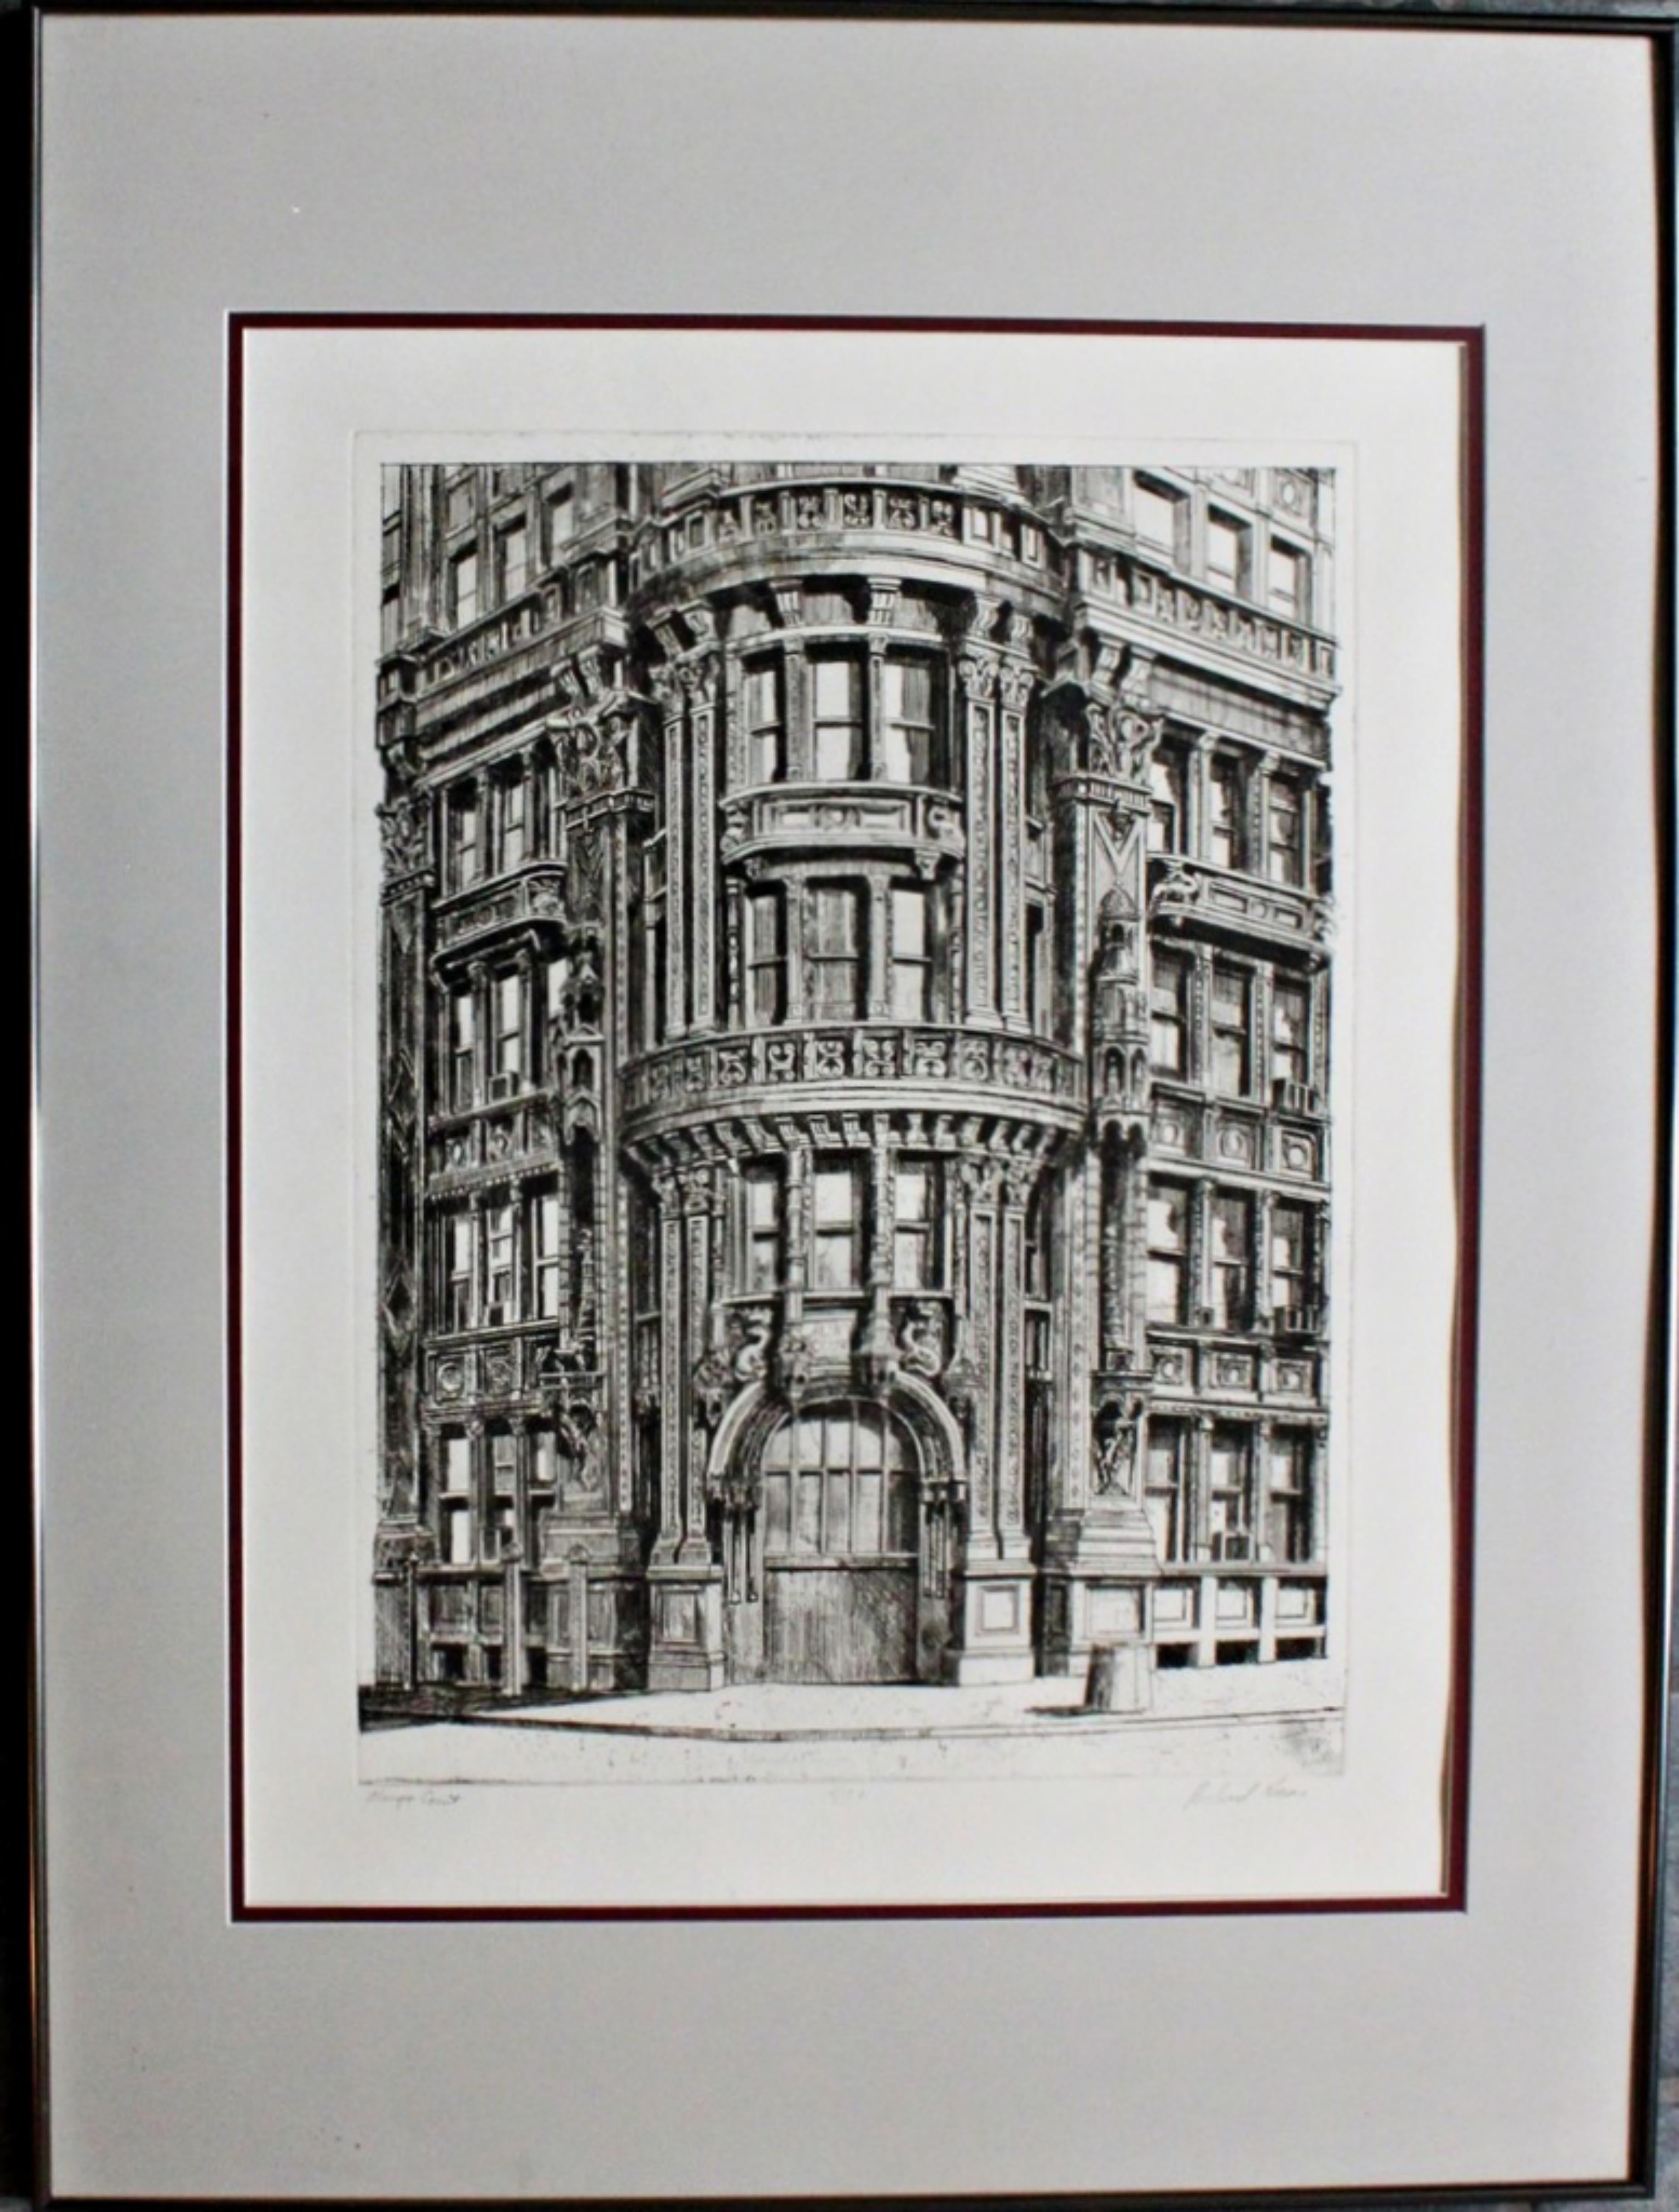 Alwyn Court (180 West 58th Street, NYC), limited edition signed etching framed - Print by Richard Haas